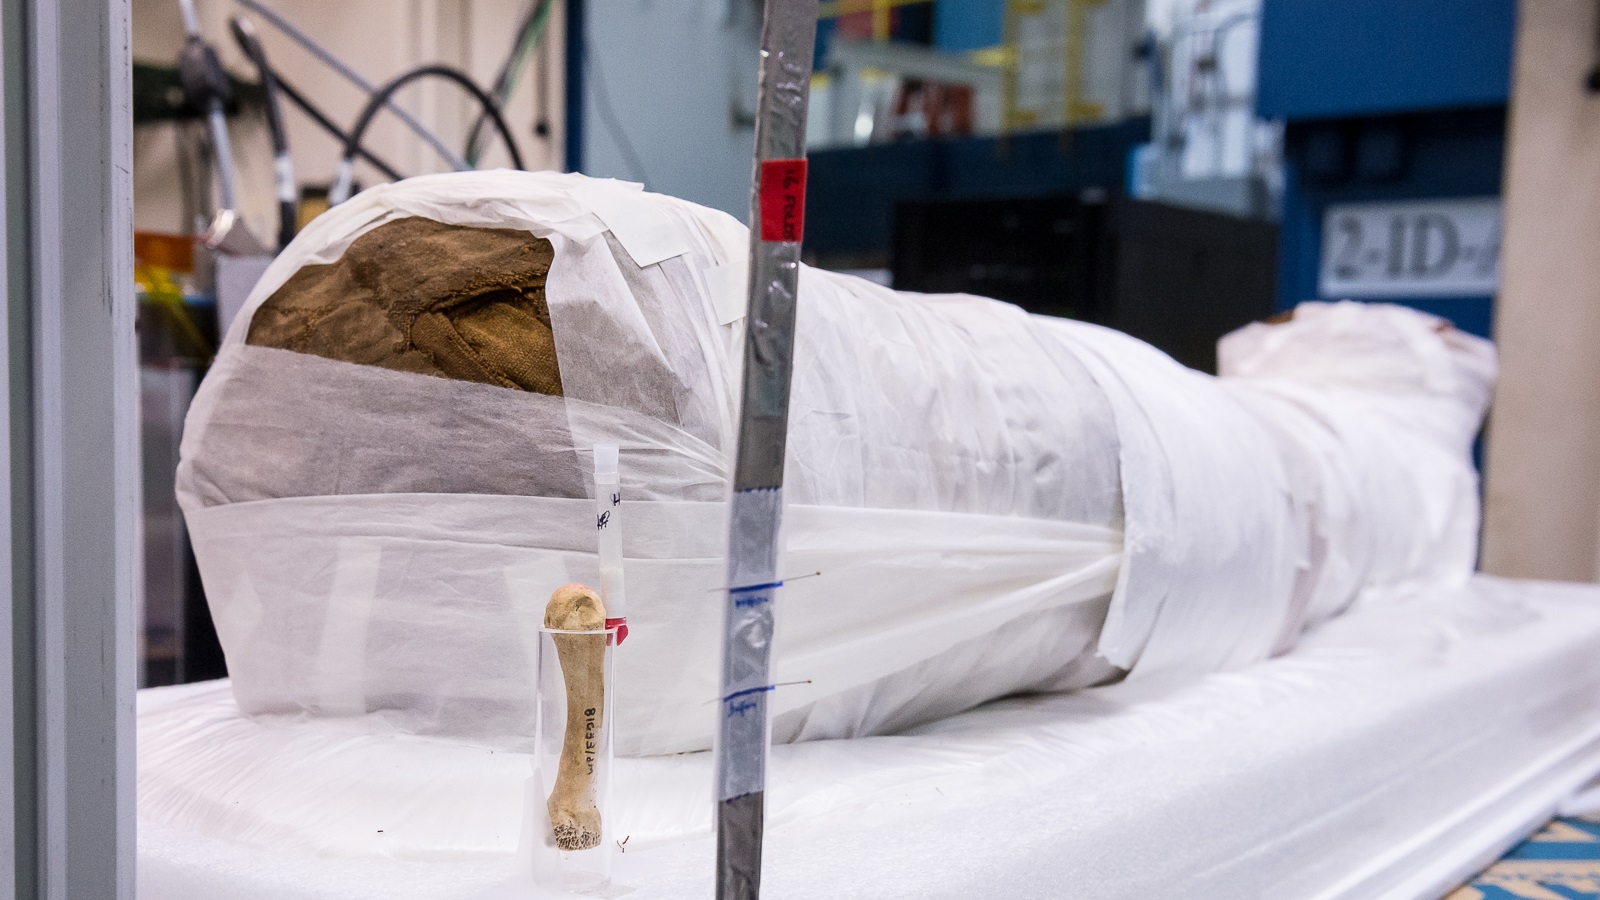 Scientists used powerful X-rays to see inside this 1,900-year-old Egyptian mummy, getting a look at the bones and artifacts beneath layers of linens and resin without causing any damage. The mummy remains on display at Northwestern University. (Image by Mark Lopez / Argonne National Laboratory.)